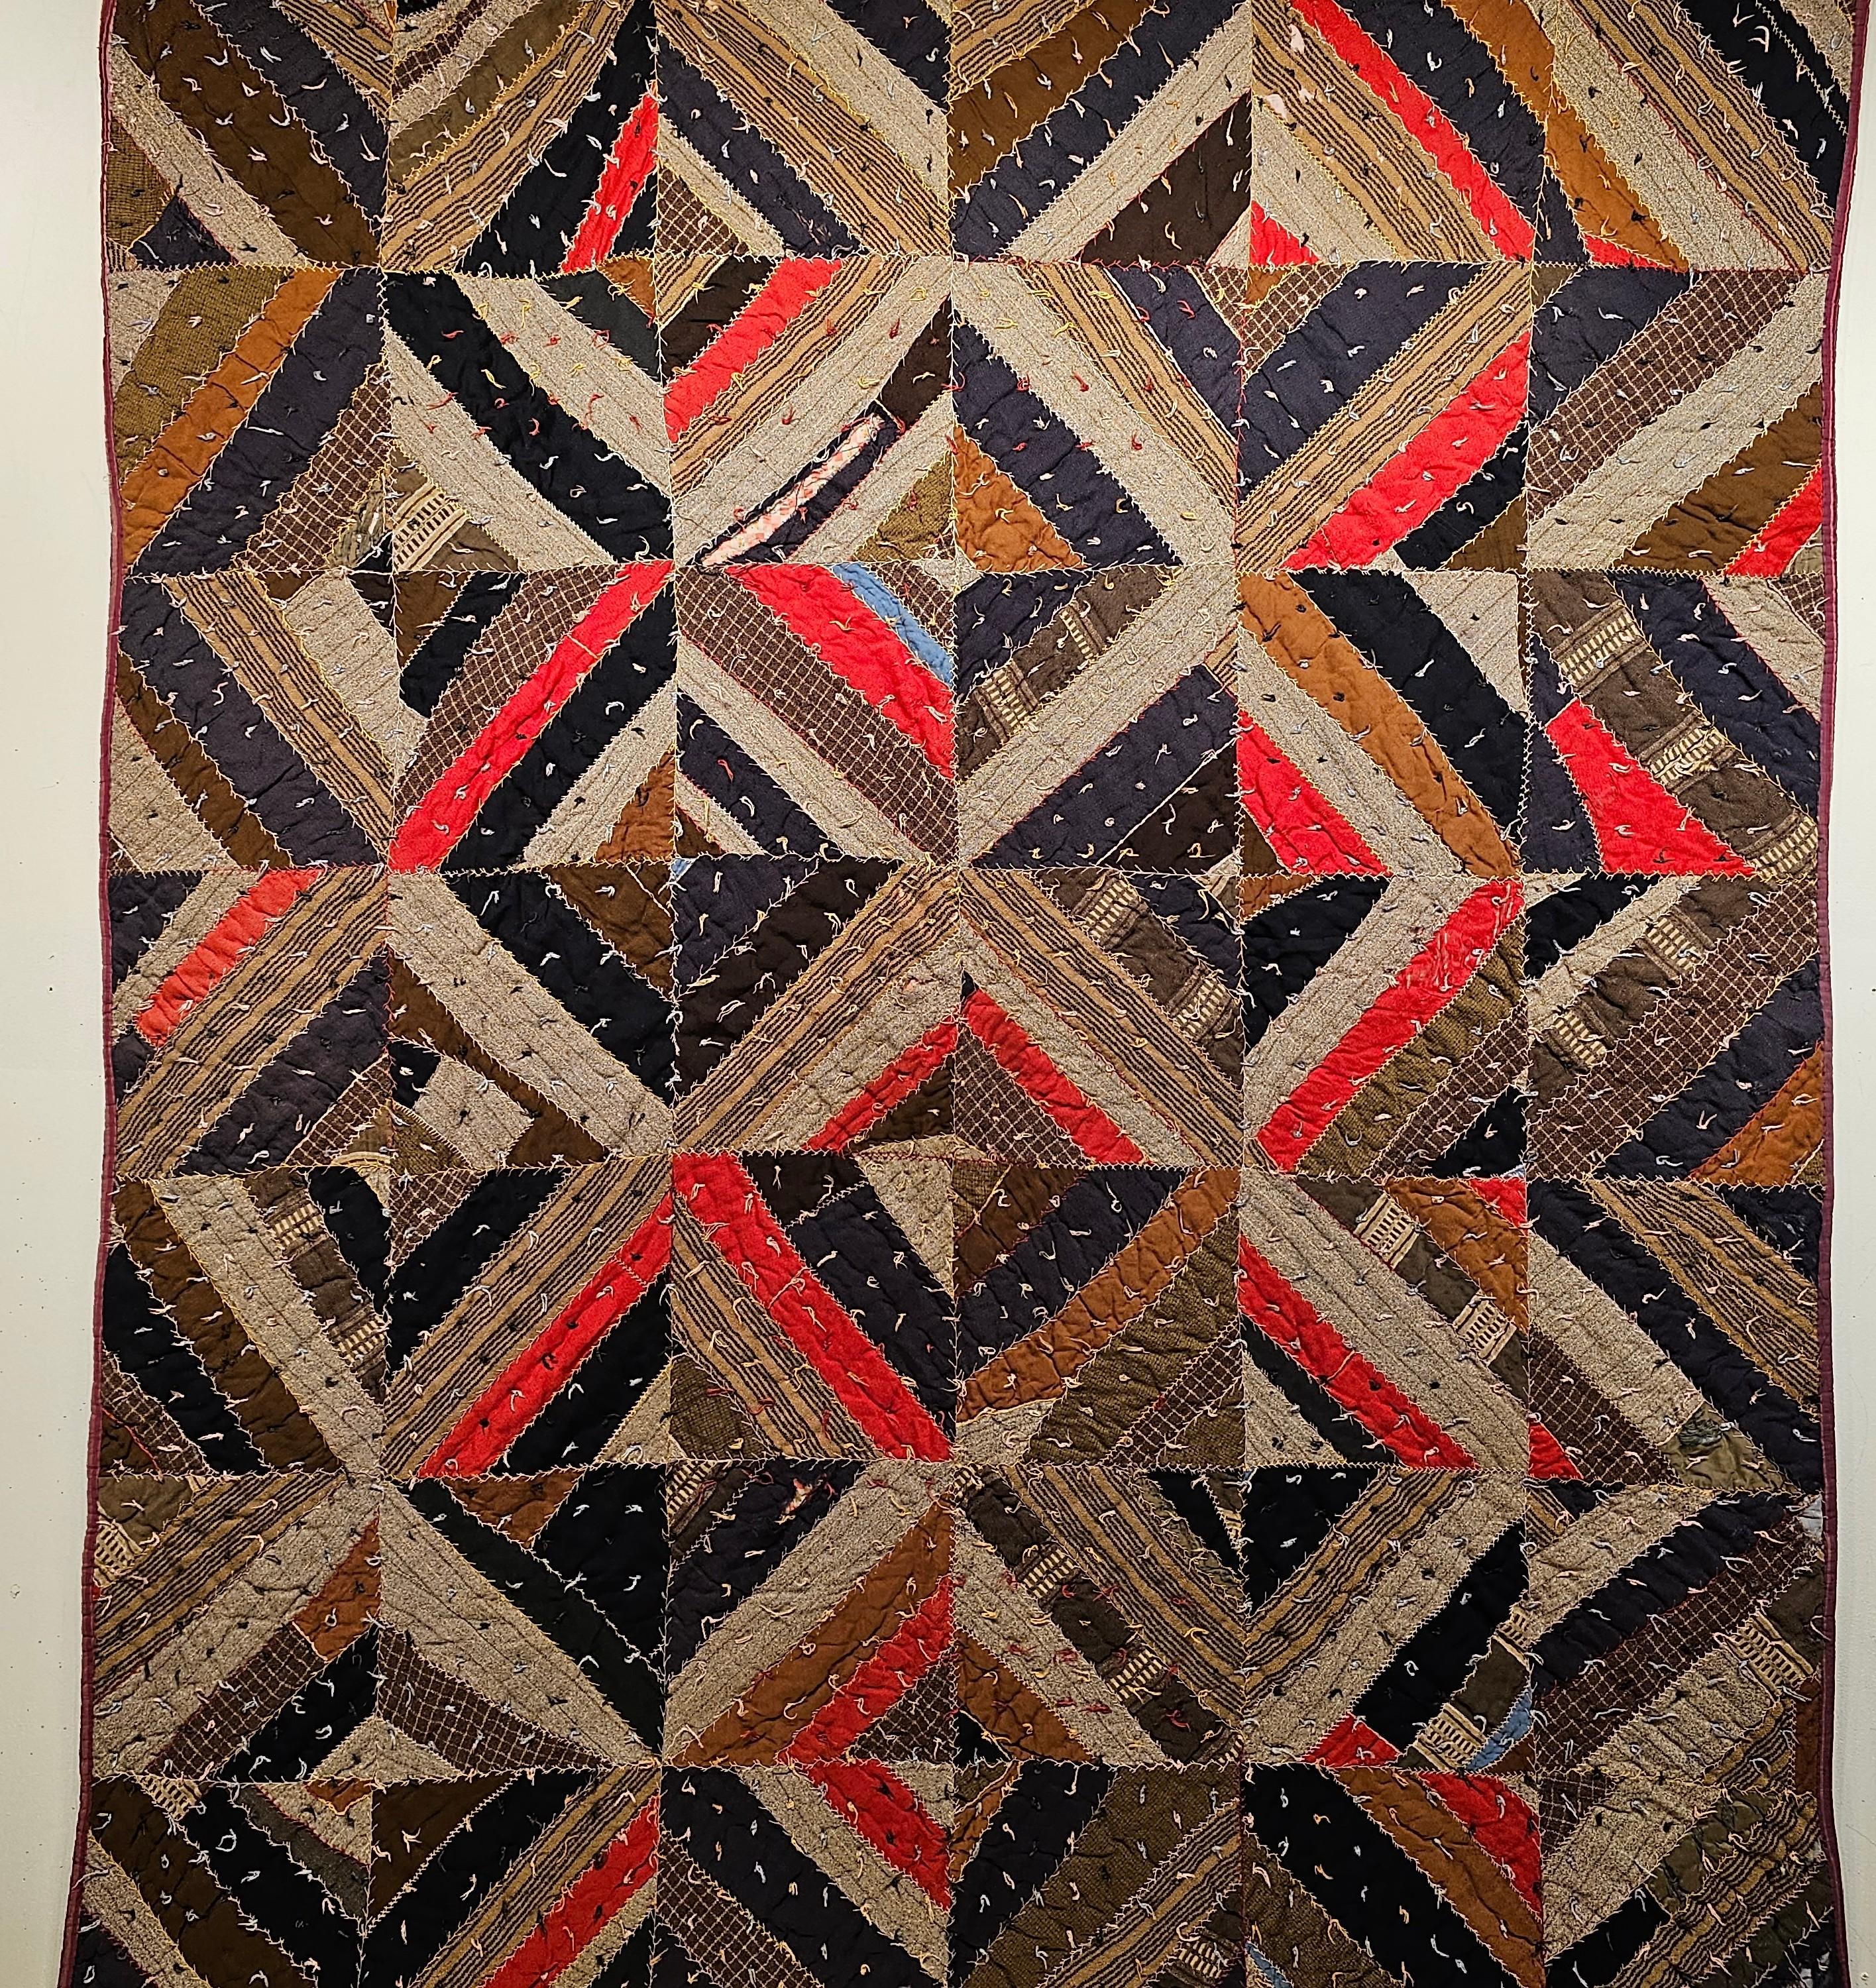 An American Civil War era African American Southern quilt circa the 1860-1870s from Alabama or Georgia in the American deep south.  The quilt is hand stitched from wool and homespun blankets.   The design consists of squares of diagonally stitched